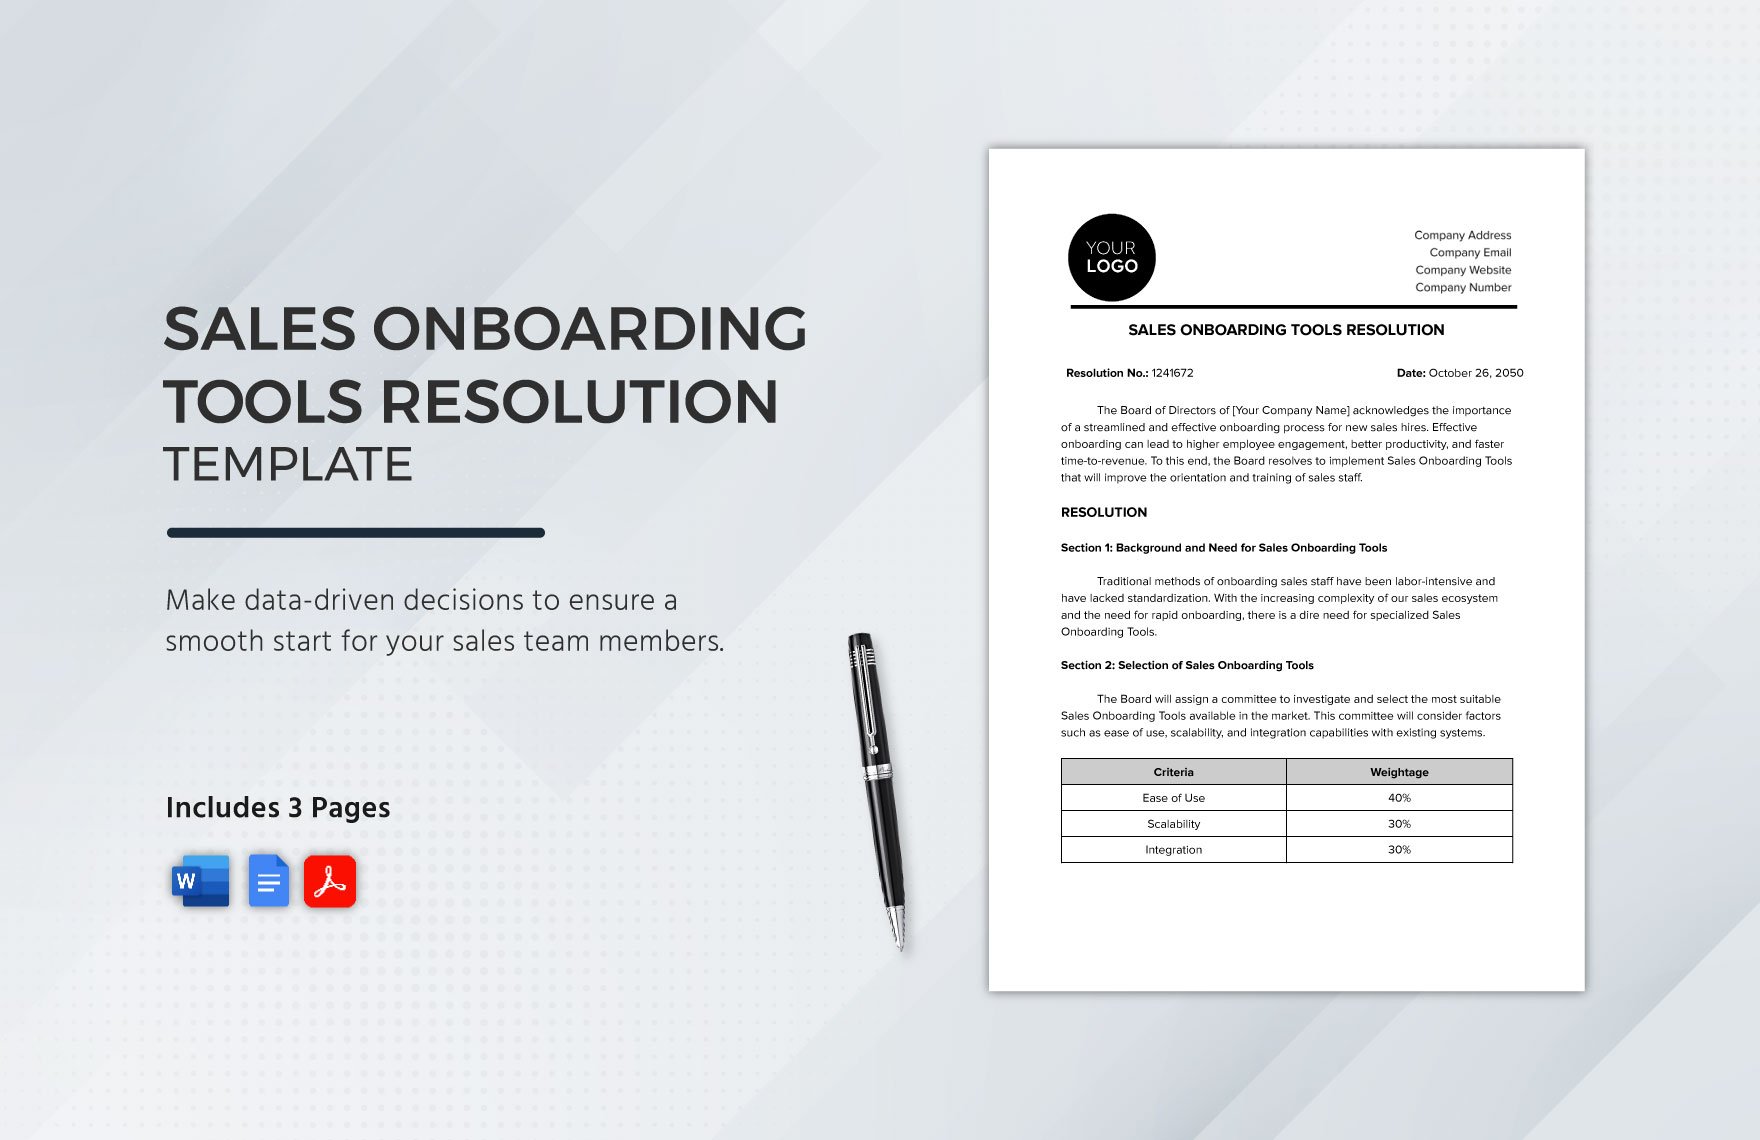 Sales Onboarding Tools Resolution Template